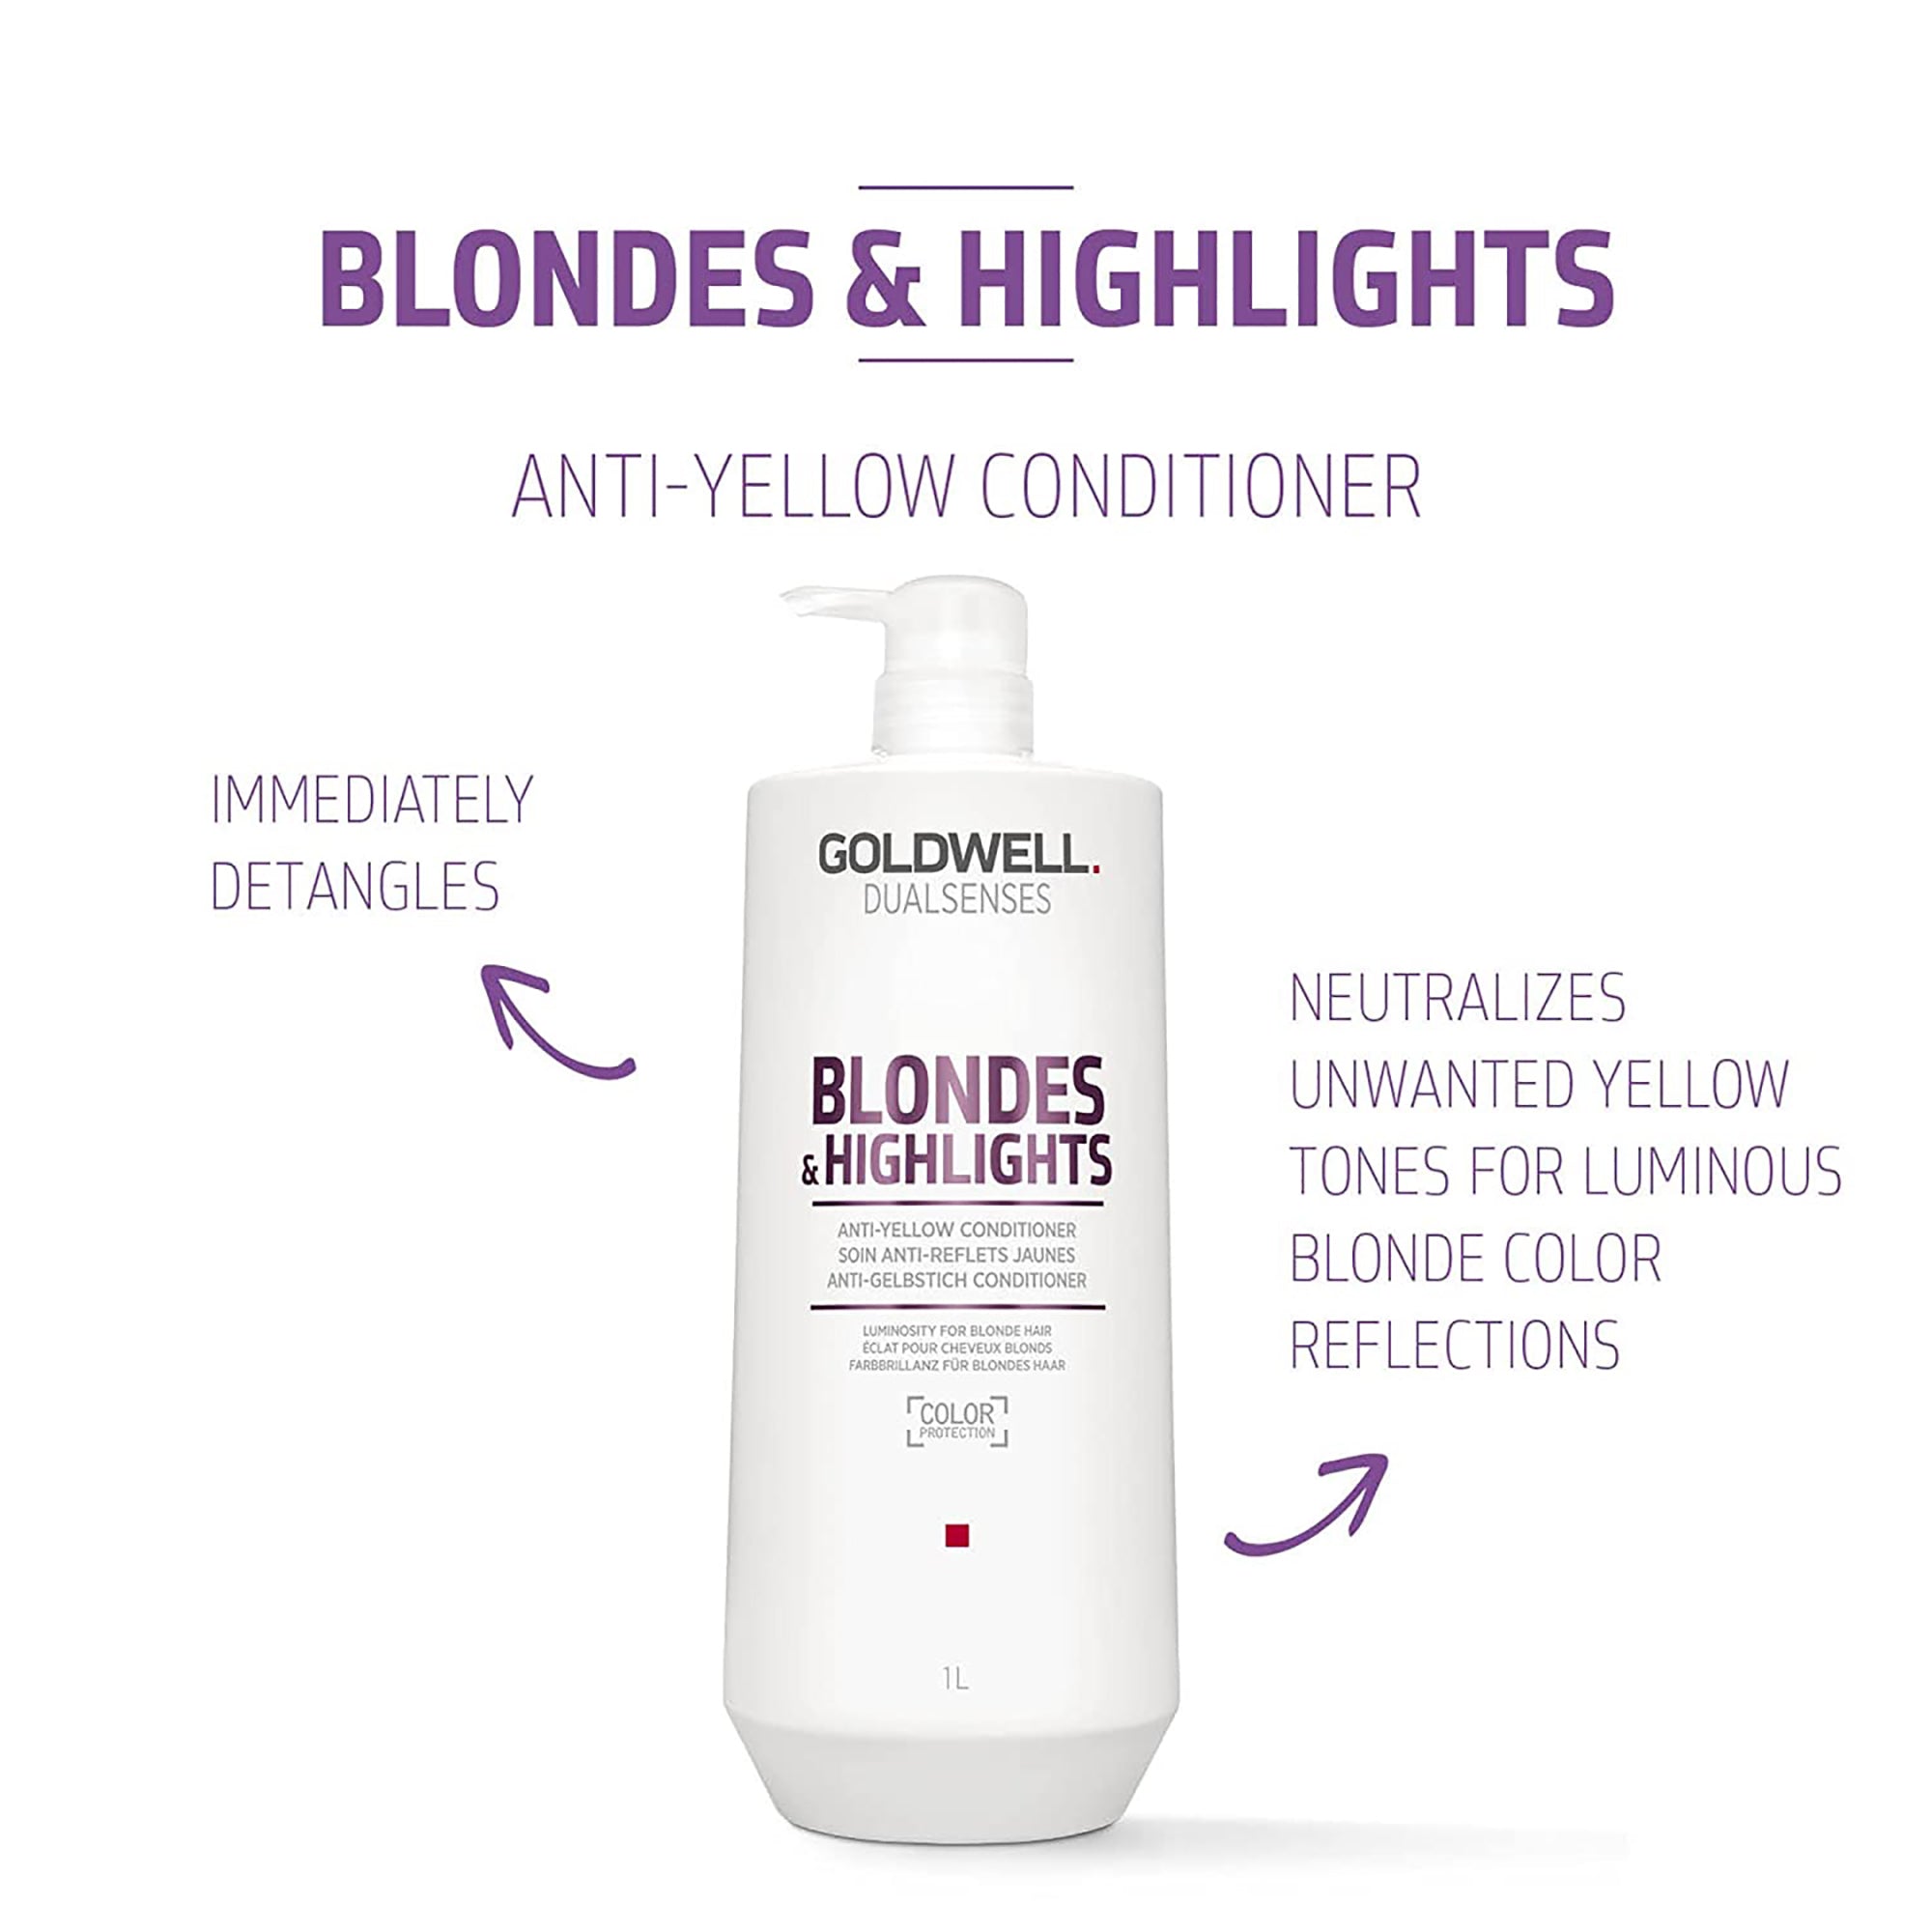 Goldwell Blonde & Highlights Shampoo and Conditioner Duo - Liter ($85 Value) / 33.8OZ